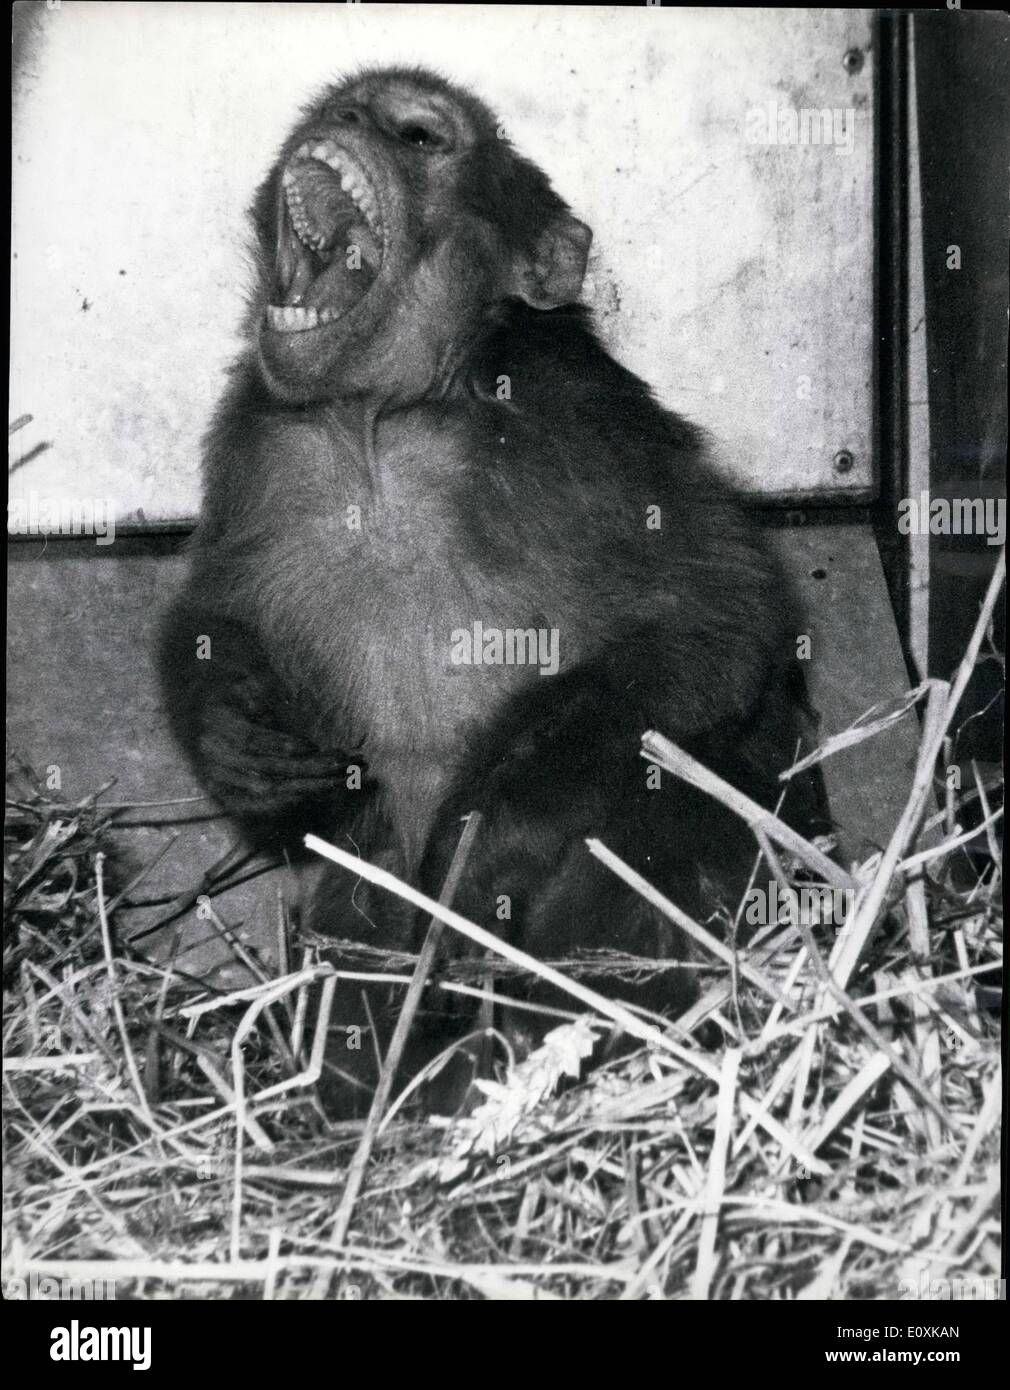 Mar. 03, 1967 - Bimbo the Monkey is captured - after 204 days.; Bimbo, the freedom-loving monkey was captured last night after 204 day on the run in a BOAC warehouse at London's Heathrow Airport. The chase ended when Bimbo was trapped in a ventilator shaft. She was taken in a net to the K.S.P.C.A. hostel at the airport, where she was given a meal of fruit, bread and milk, grain and vitamin syrup. Ever since Bimbo escaped from a cargo of monkeys she has defied traps. bait, tape recordings and other tricks designed to lure her down from the rafters in the warehouse Stock Photo